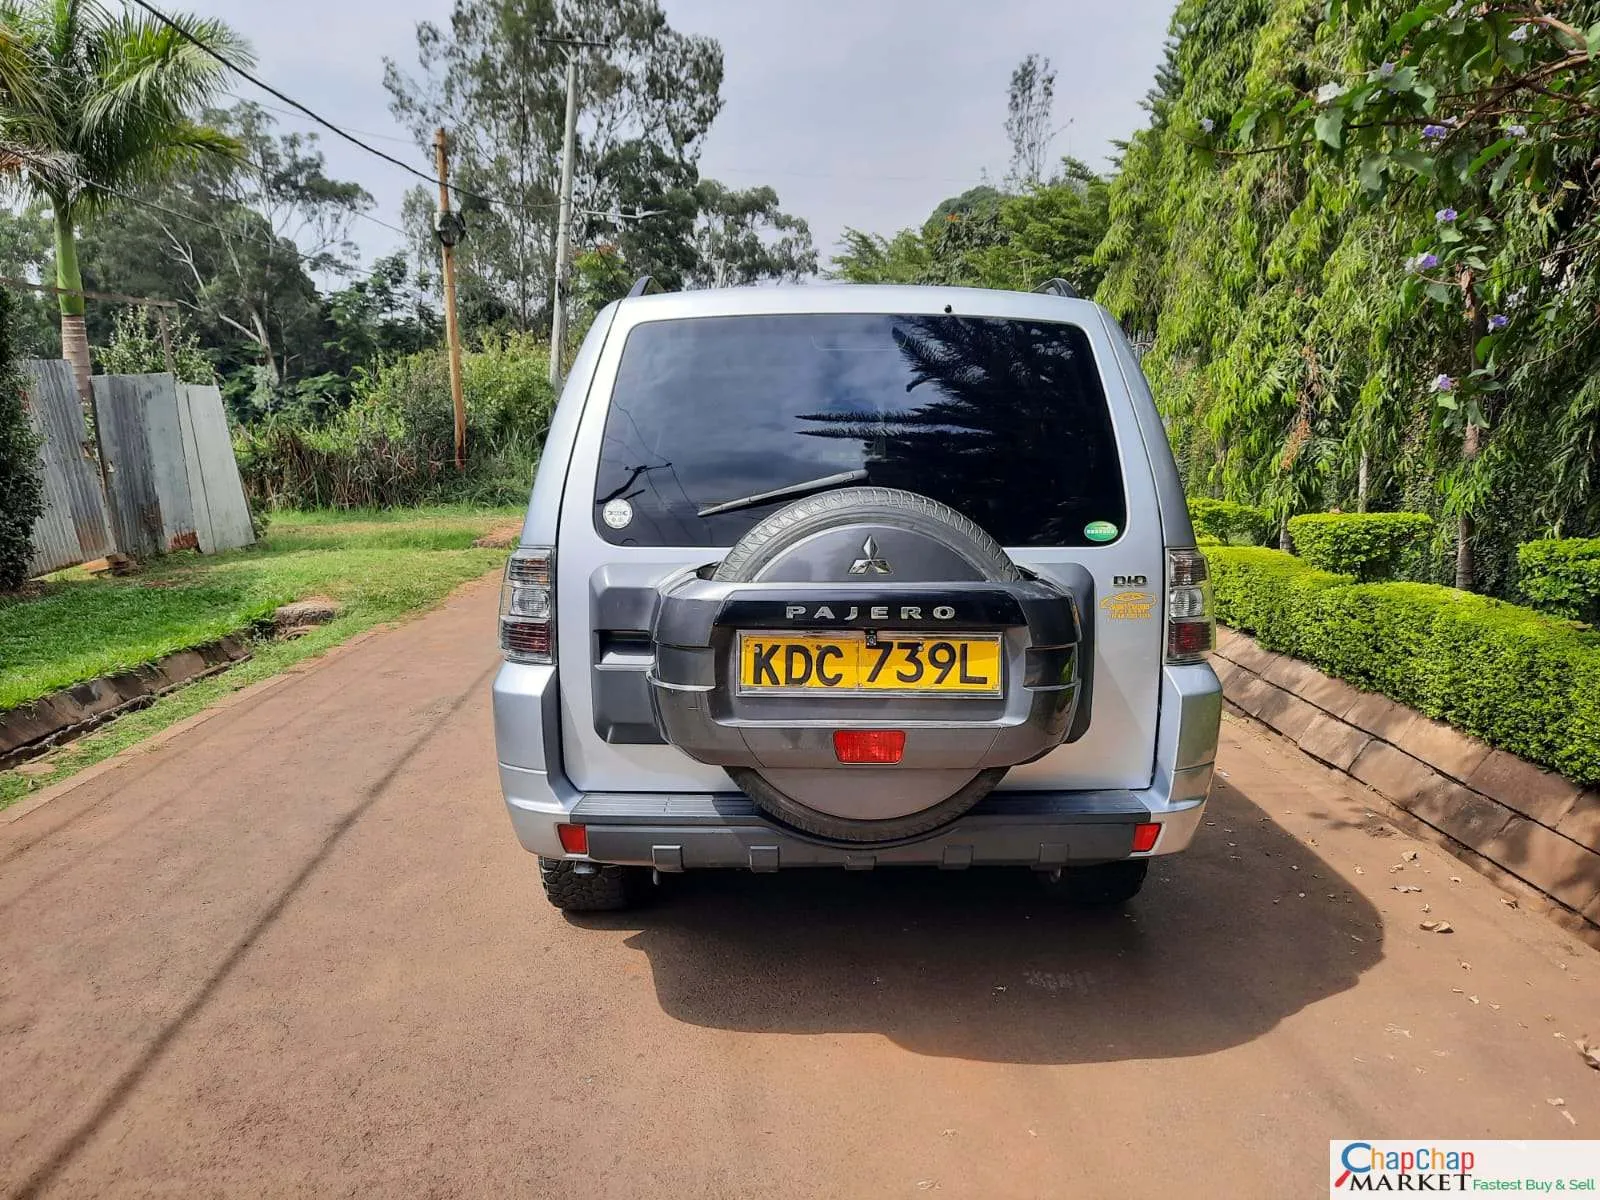 Mitsubishi Pajero For sale in Kenya fully loaded You Pay 30% Deposit Trade in Ok EXCLUSIVE